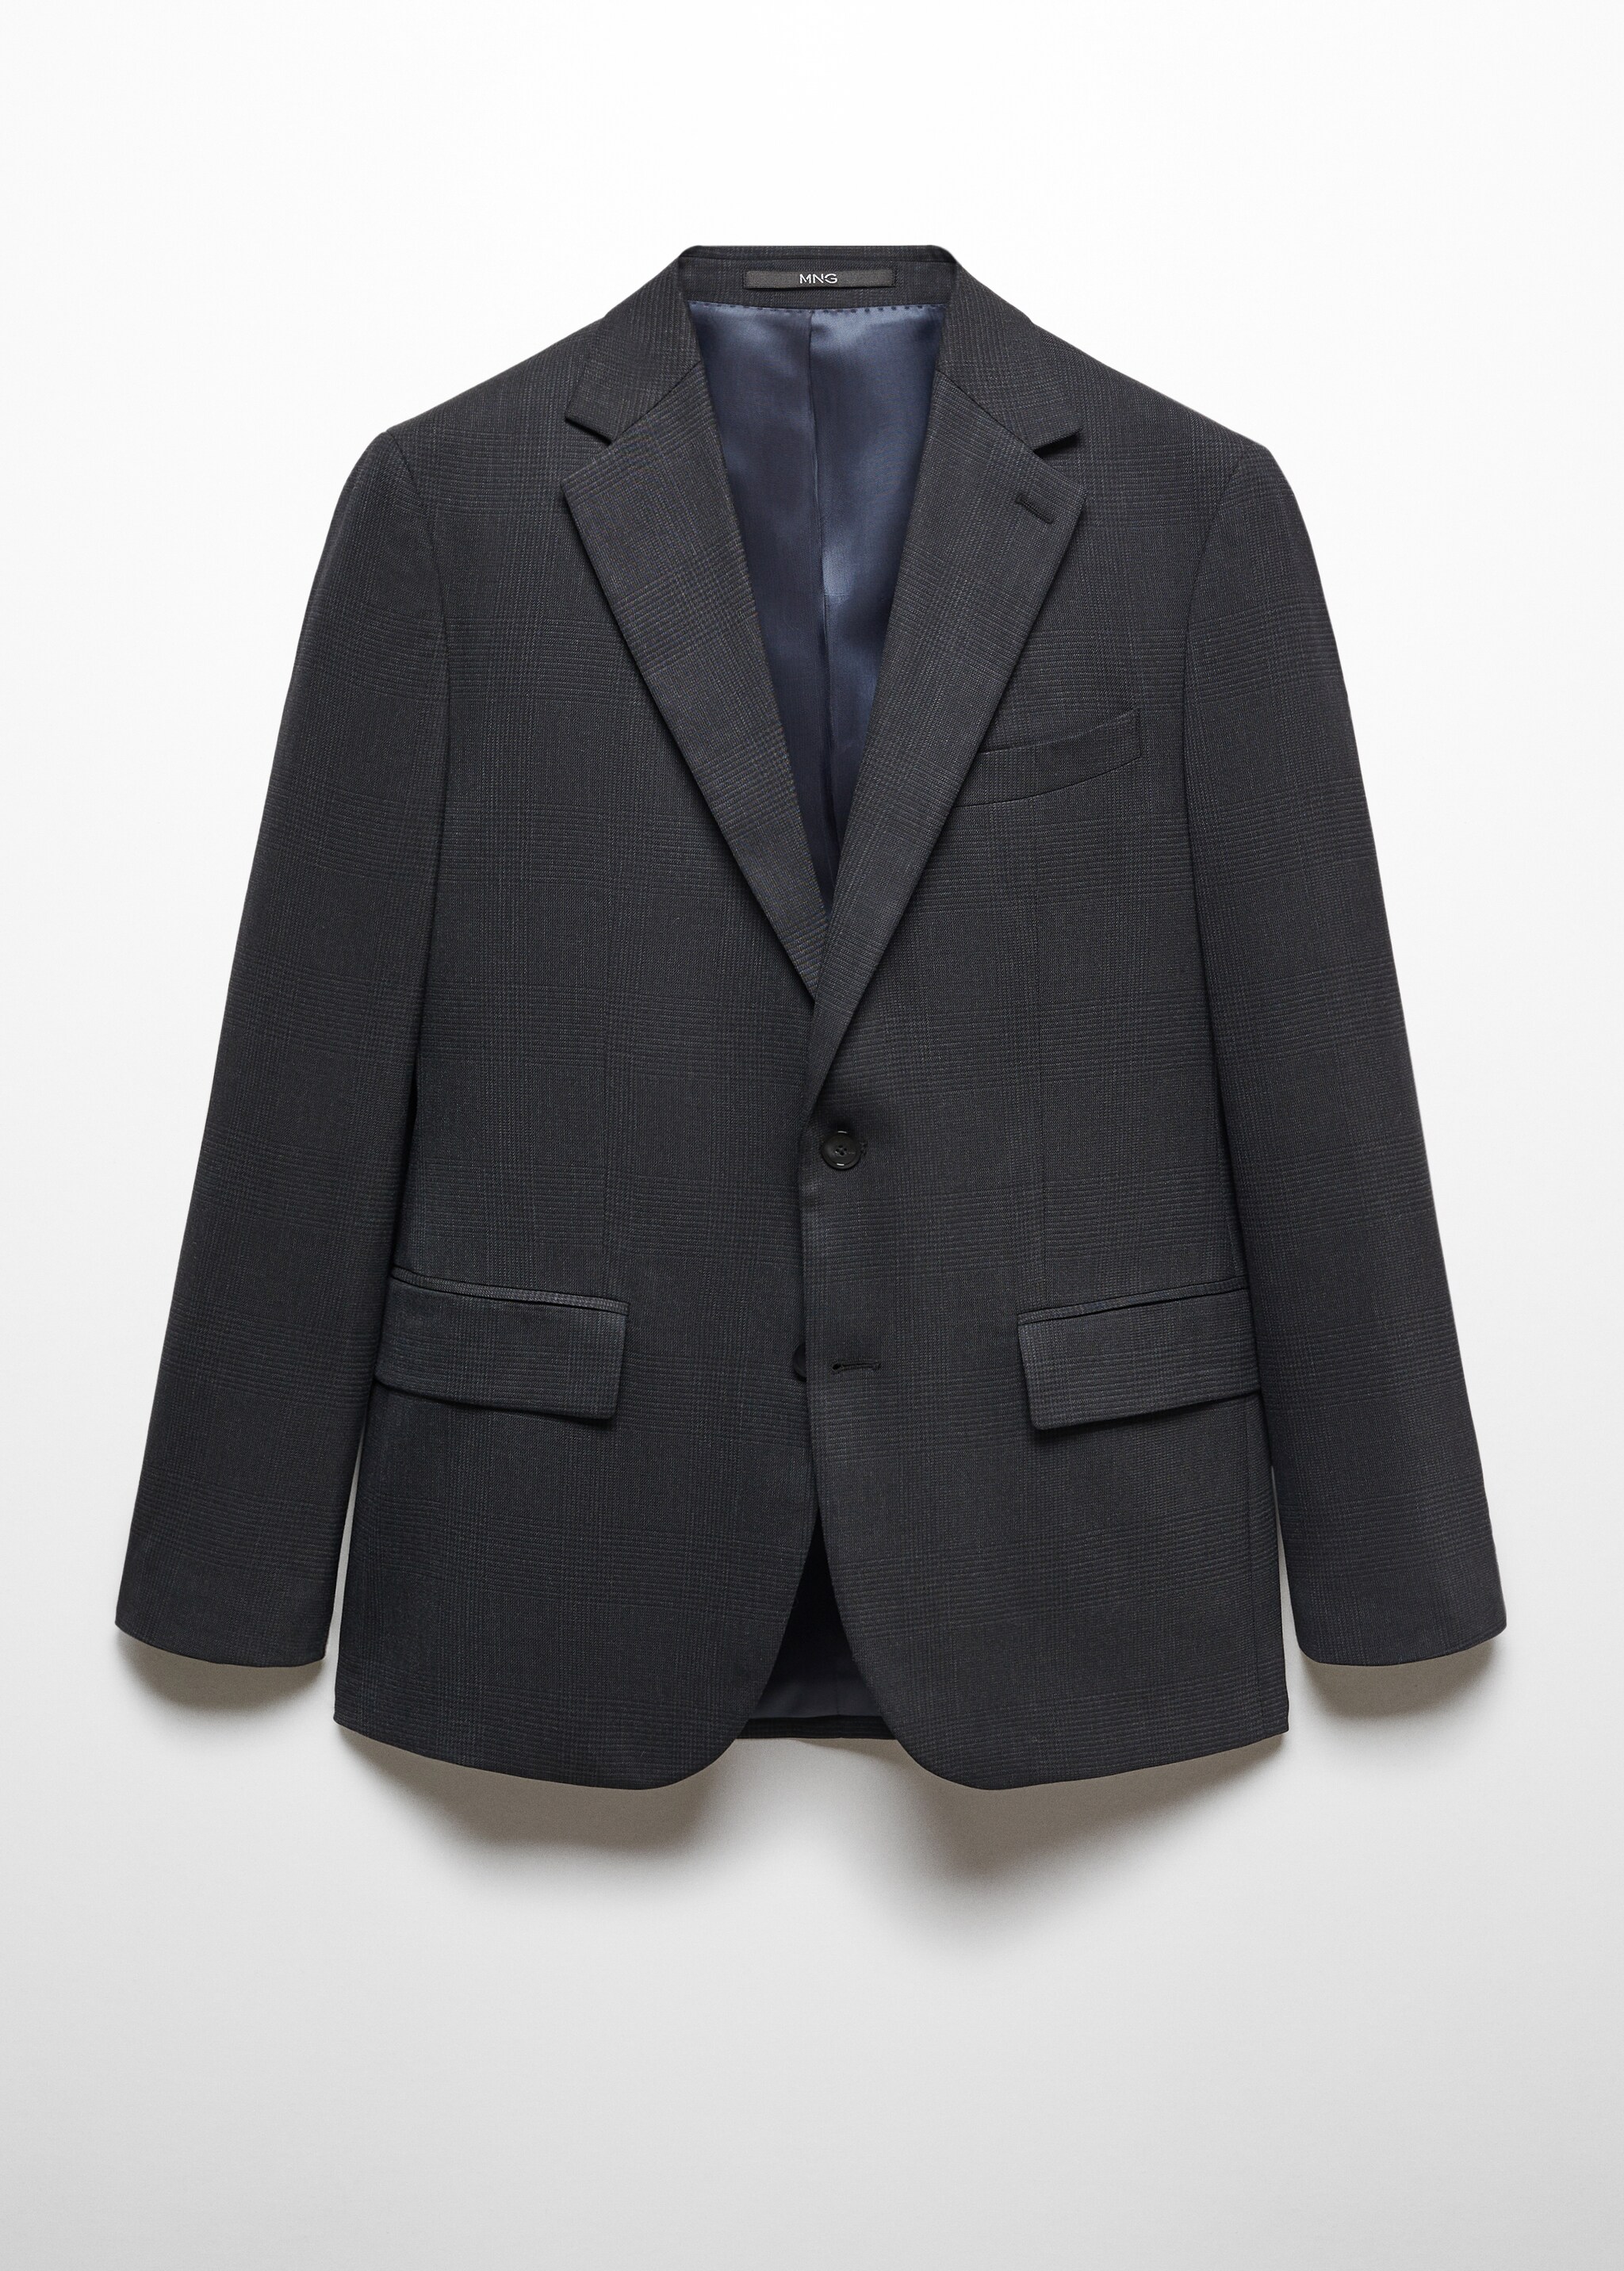 Slim fit cold wool suit jacket - Article without model